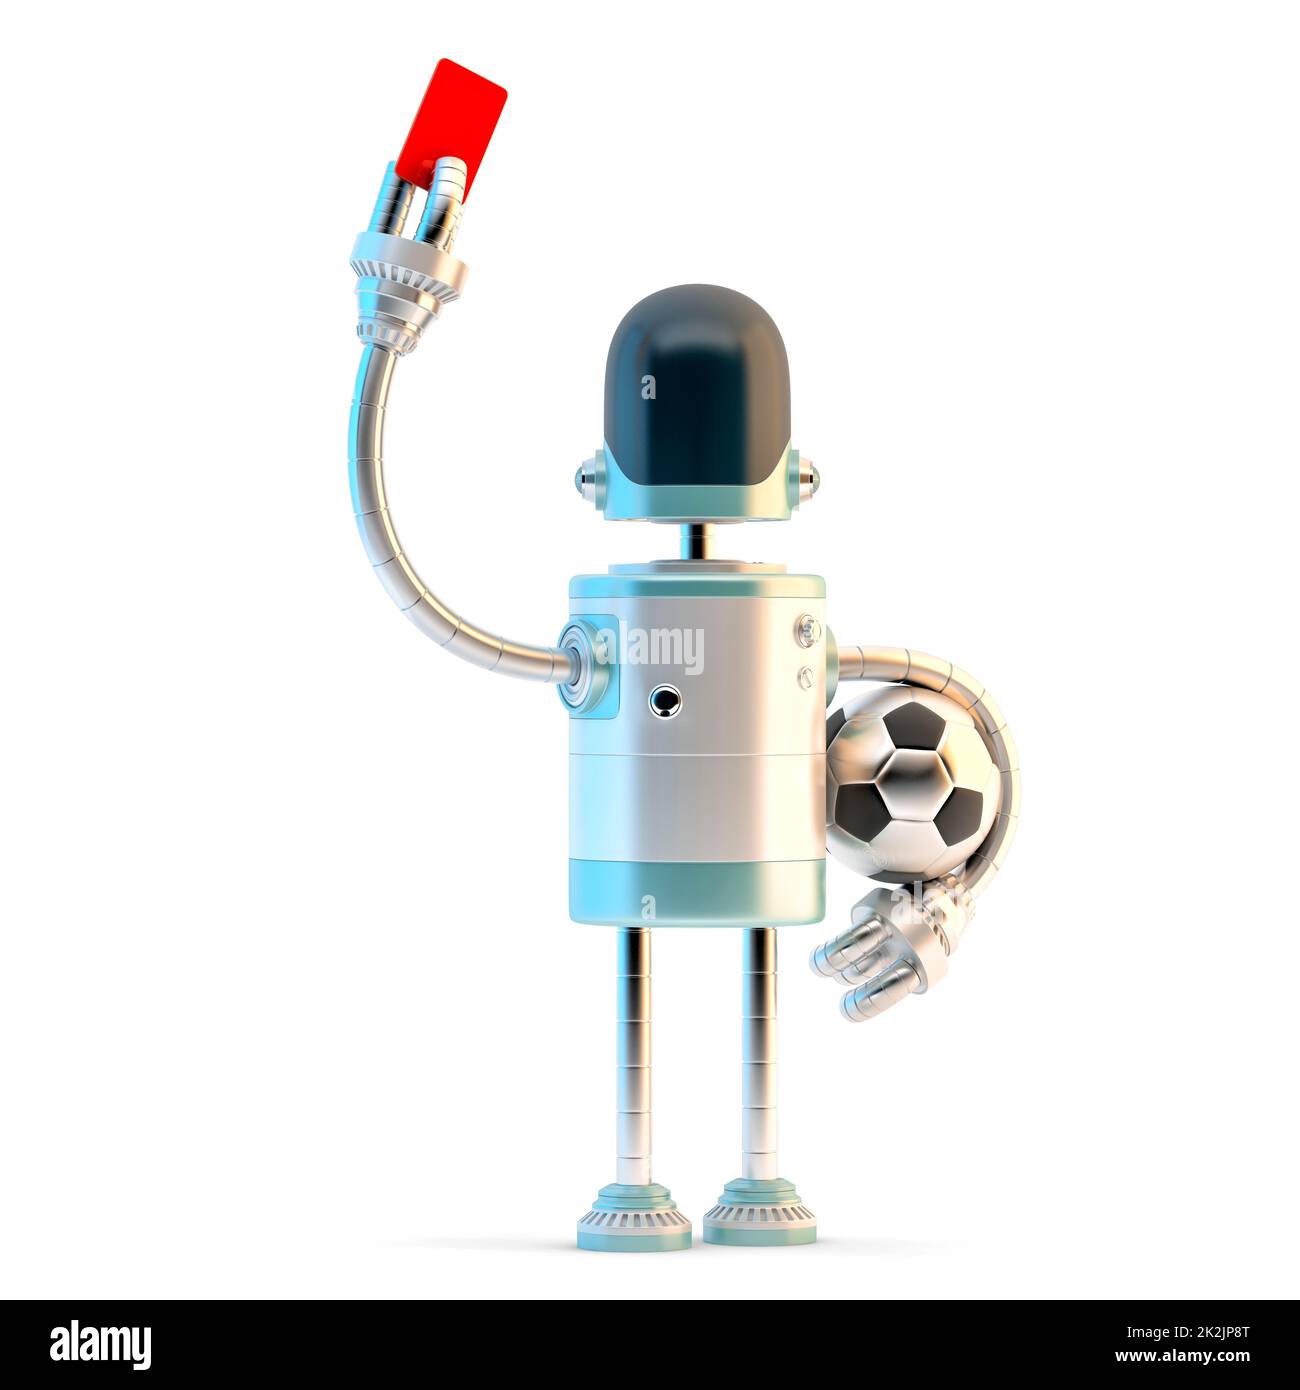 Robot Referee showing the red card. 3D illustration. Isolated Stock Photo